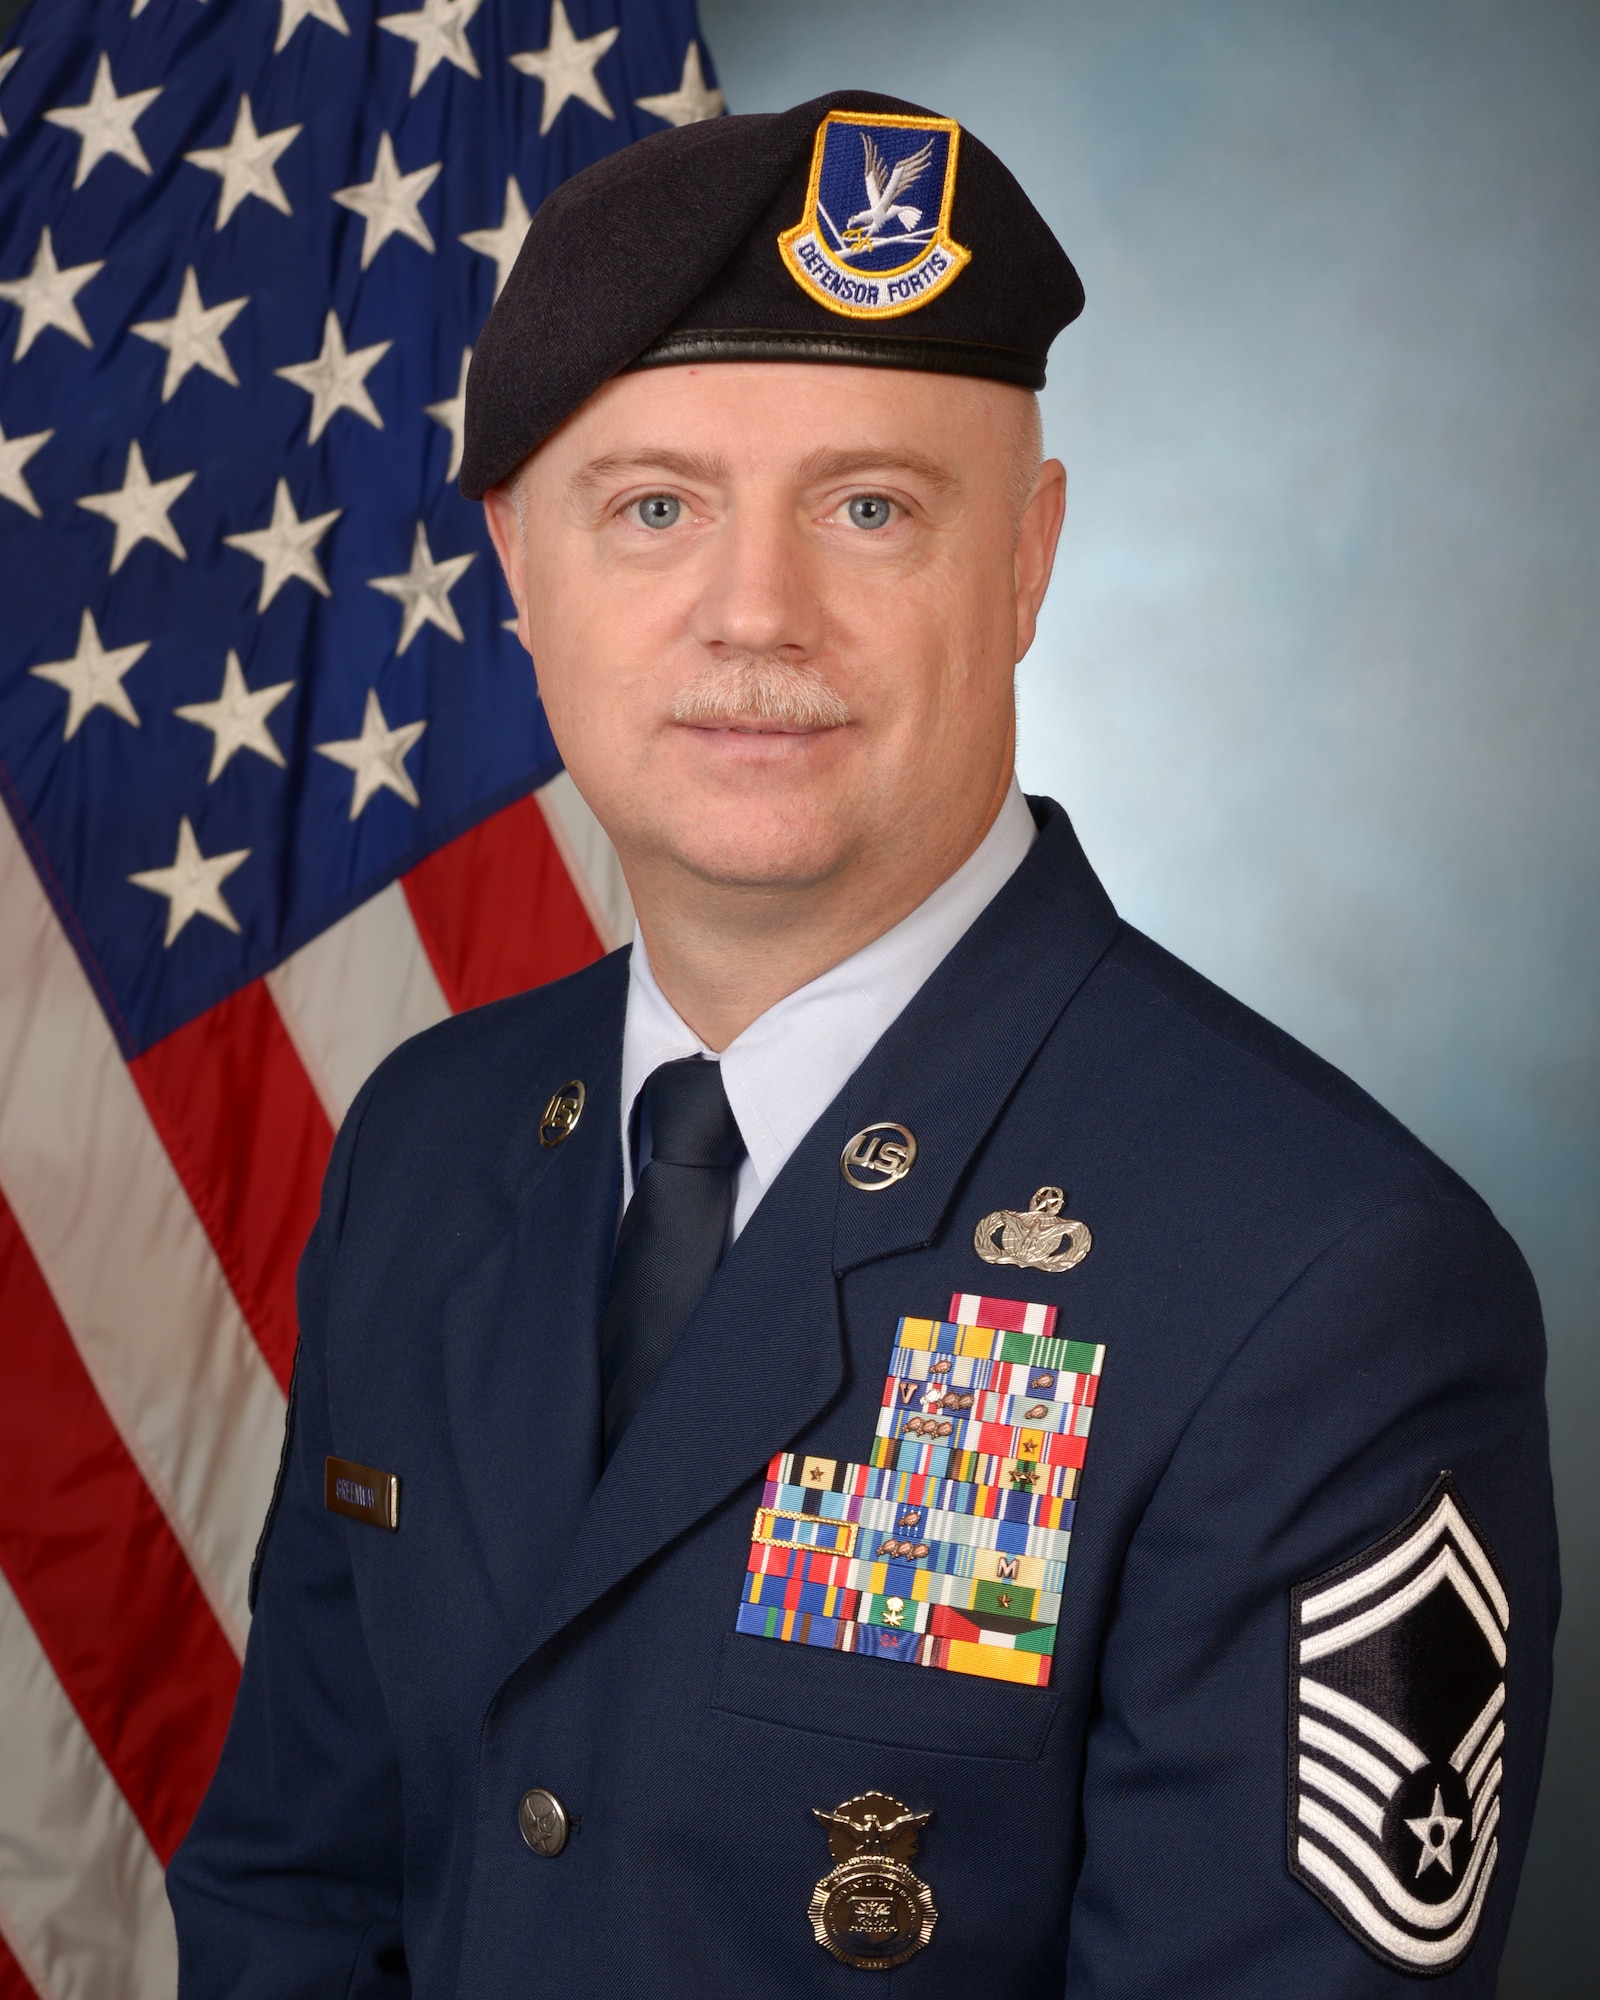 U.S. Air Force Senior Master Sgt. William Greenway, 116th Security Forces Squadron (SFS) superintendent, Georgia Air National Guard, poses for an official photo, Robins Air Force Base, Ga., Jan. 28, 2012. The 116th SFS is the security arm of the Joint STARS 116th Air Control Wing. (U.S. Air National Guard photo by Master Sgt. Roger Parsons/Released)